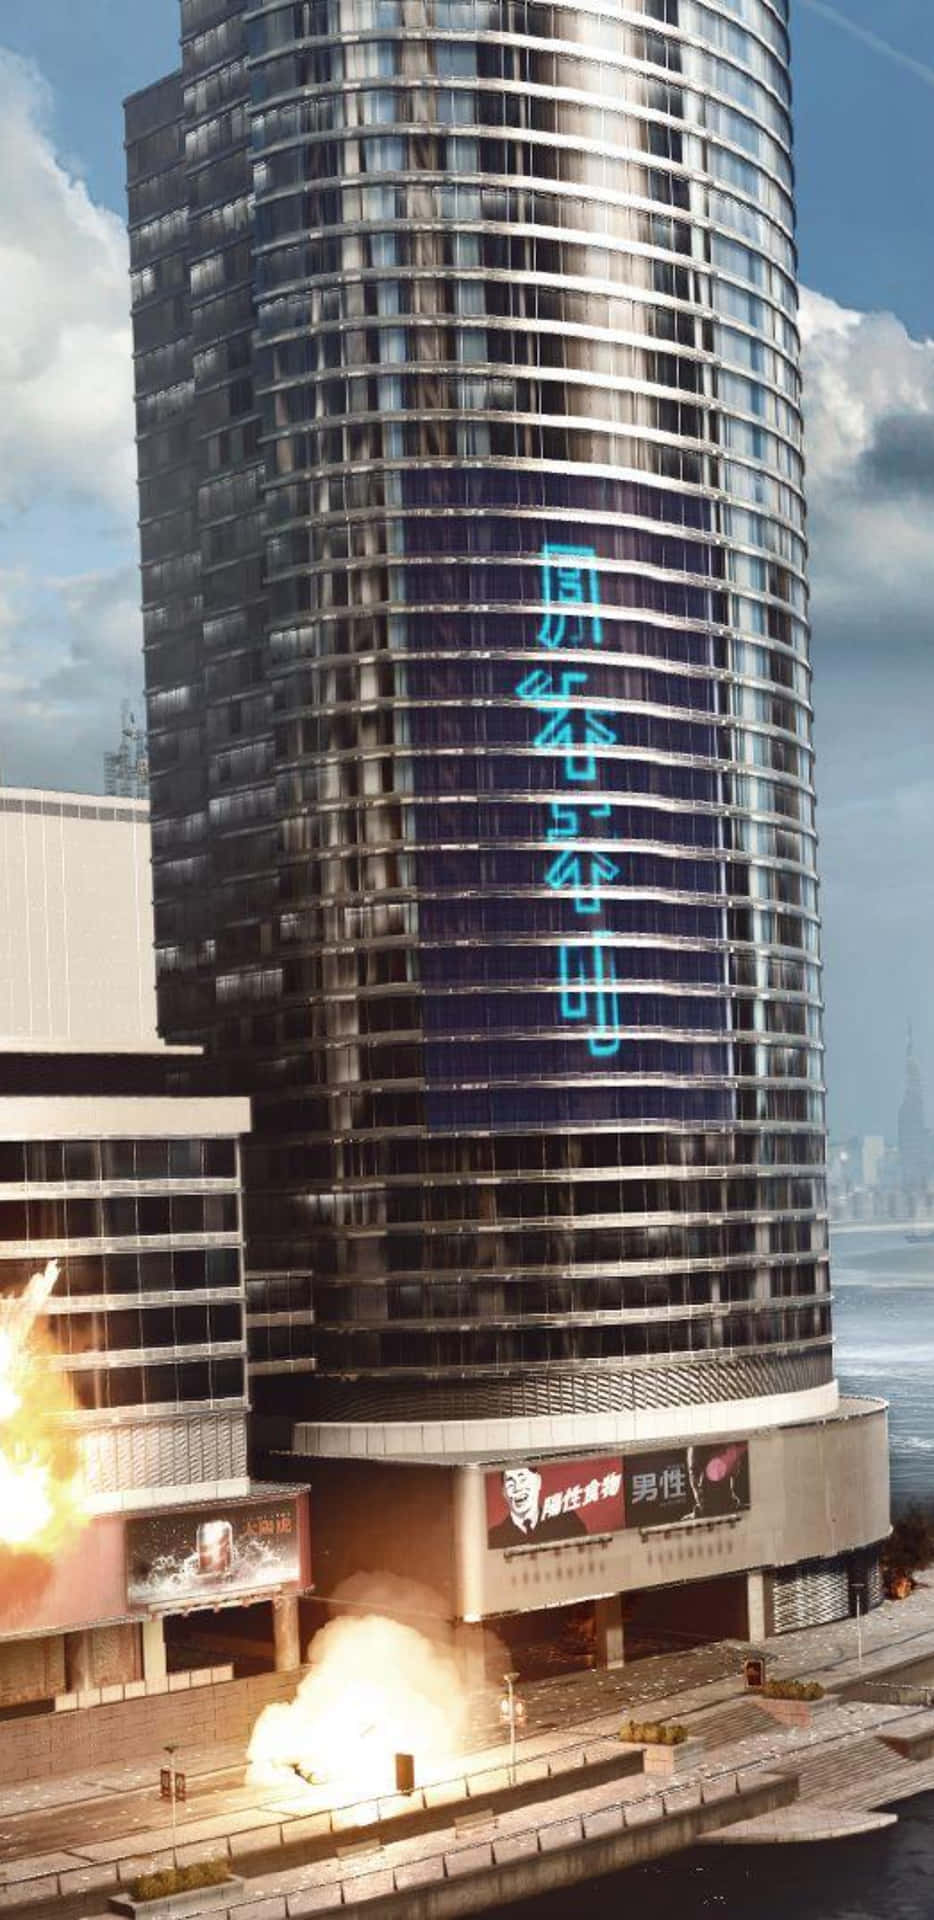 A Building With A Large Fireball In The Background